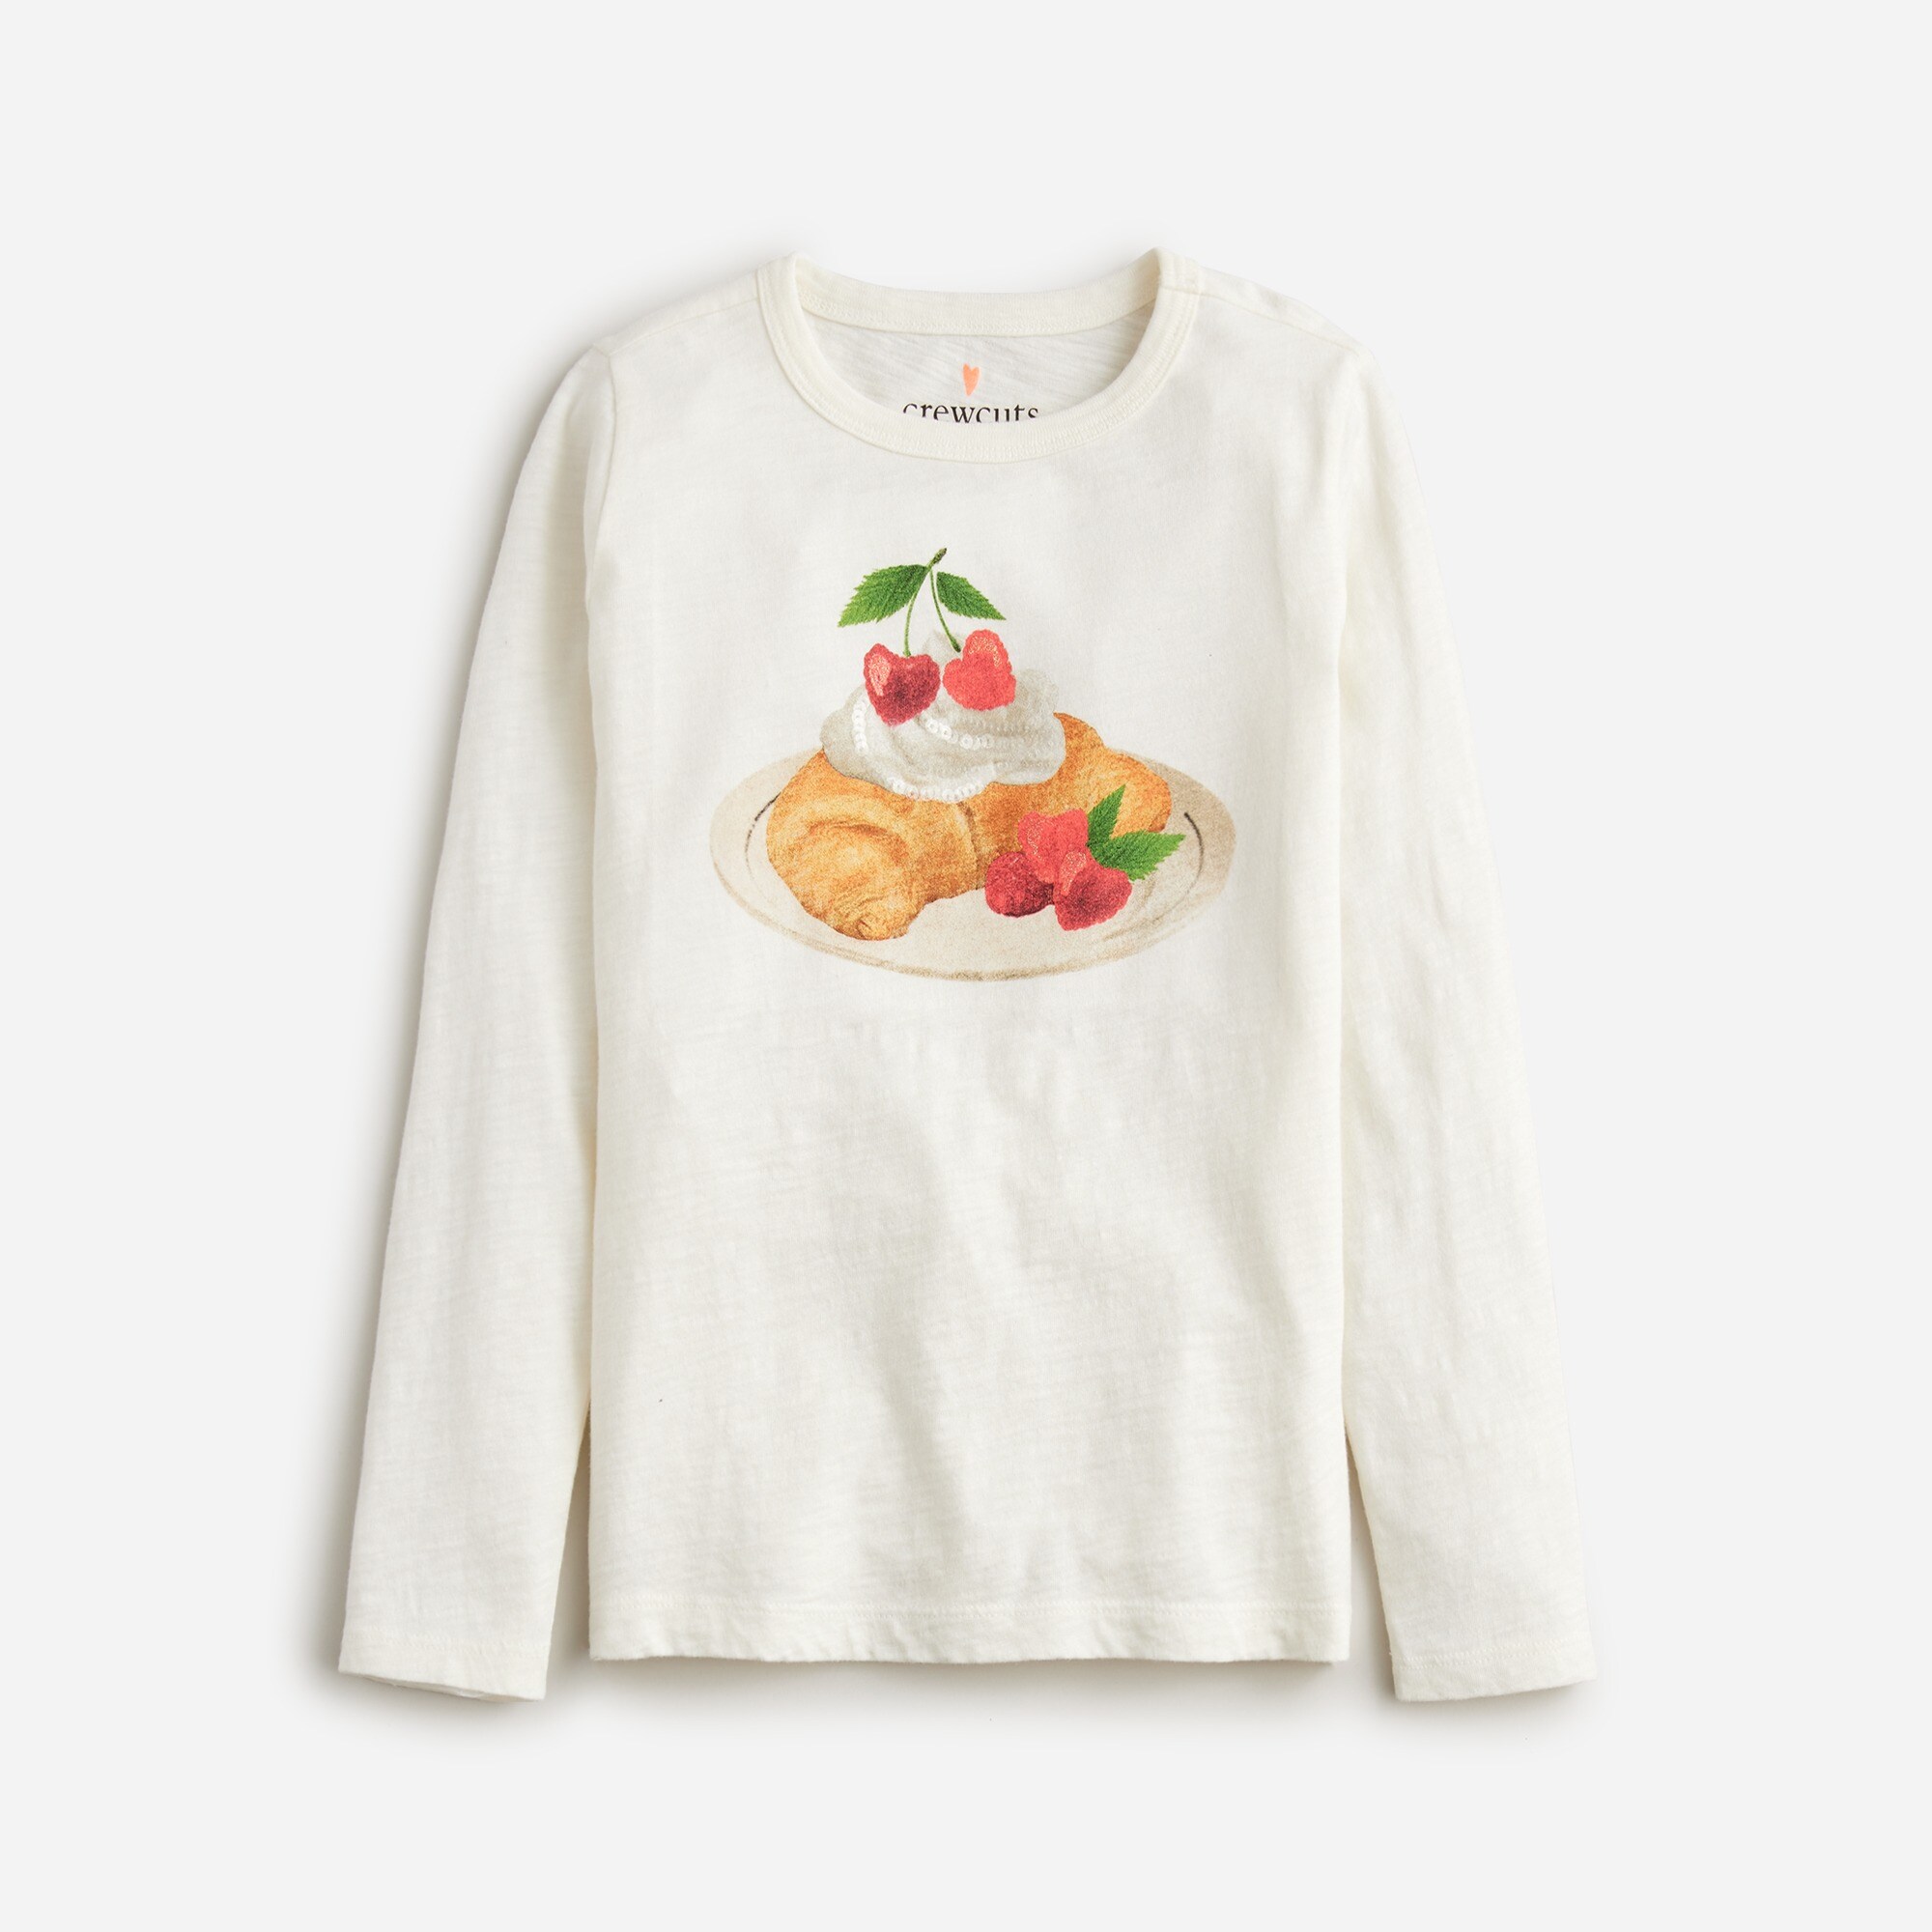 J.Crew: Girls' Sequin Pastry Graphic T-shirt For Girls